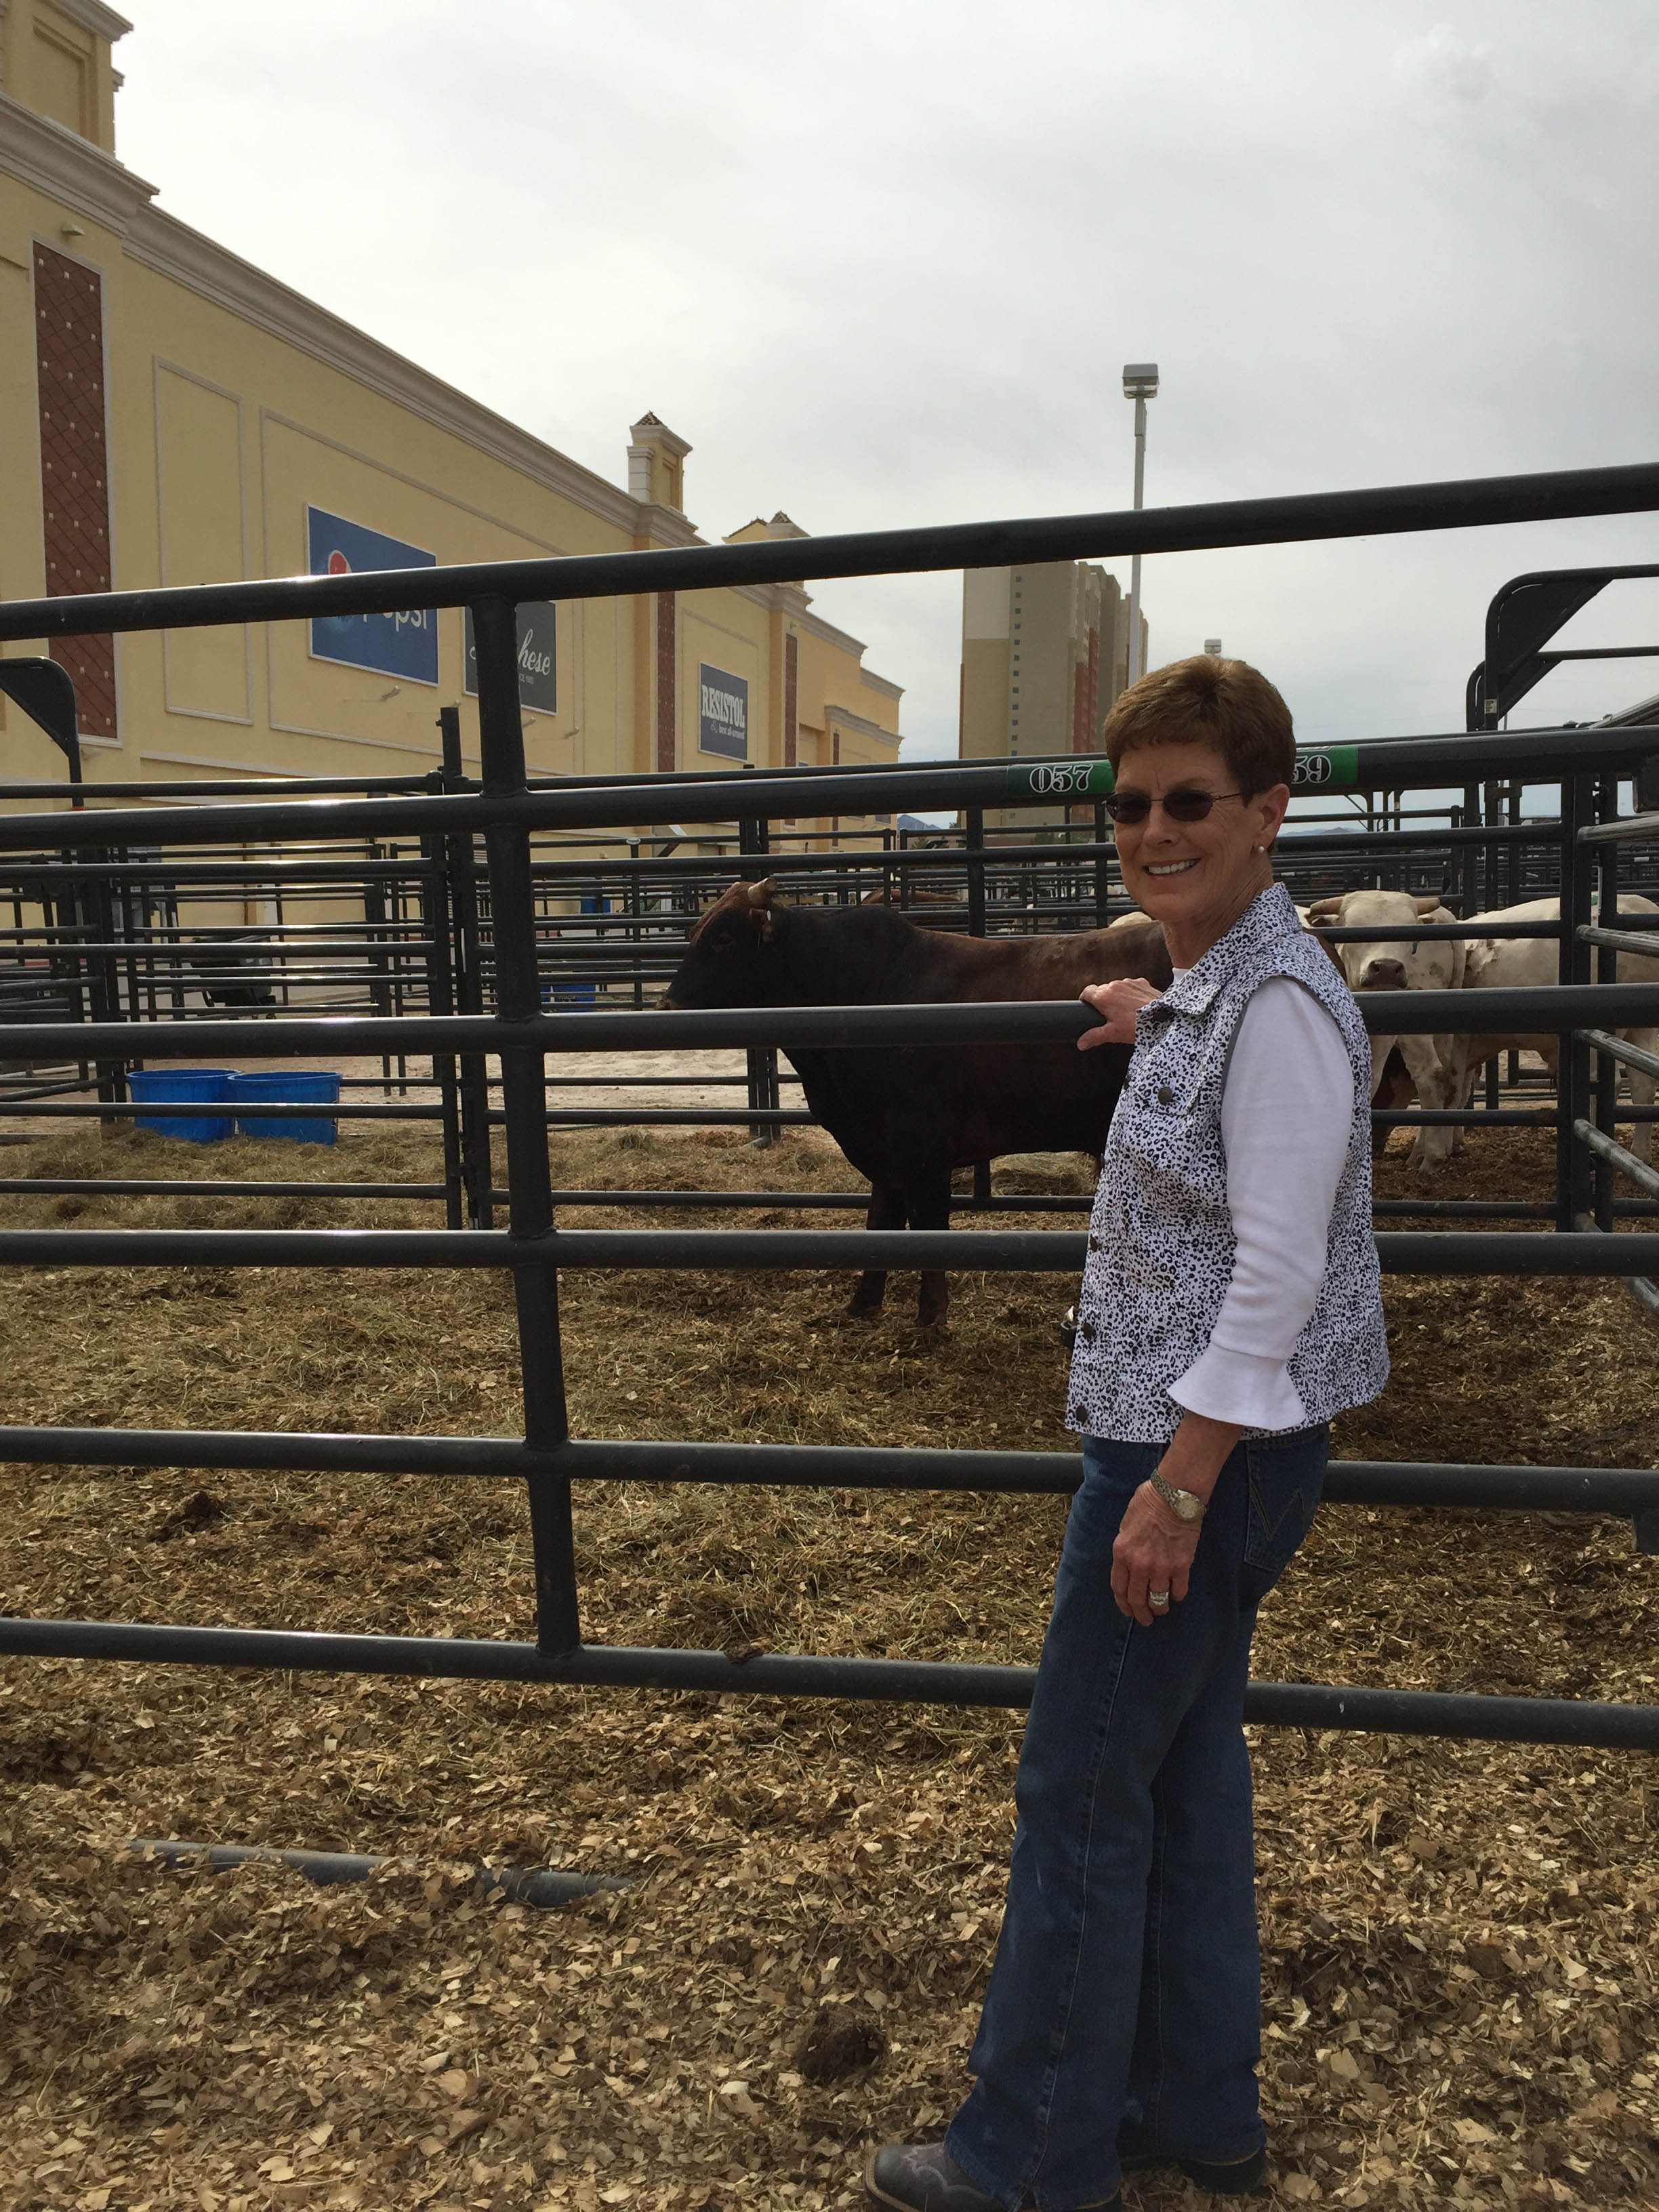 Nina Webb of Guymon, Oklahoma Recognized as a Significant Woman in Oklahoma Agriculture